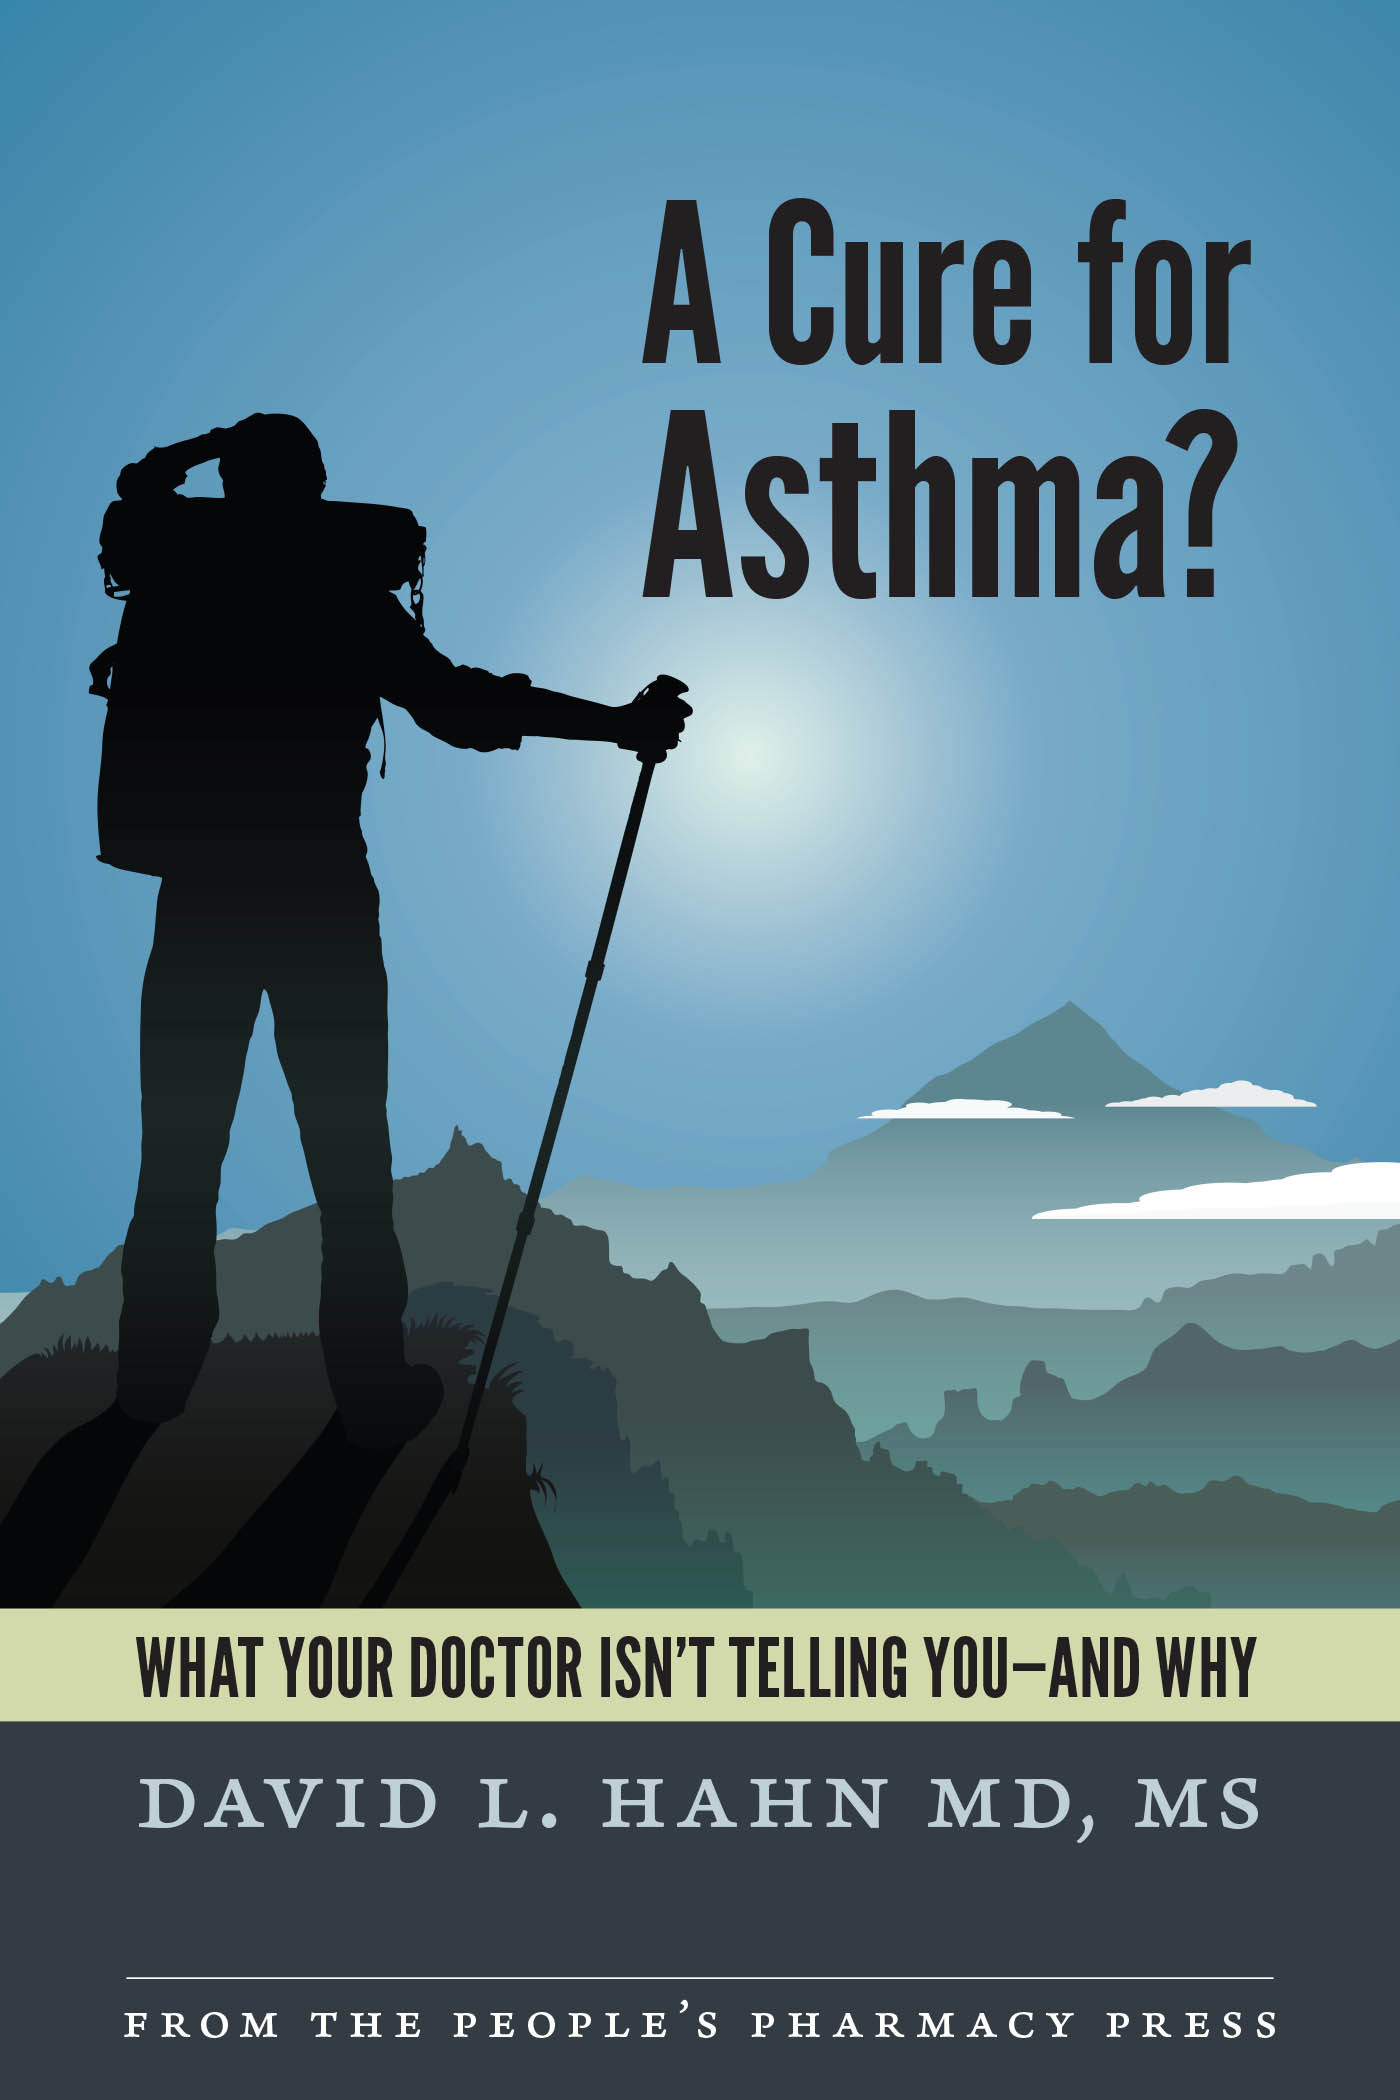 A Cure for Asthma?